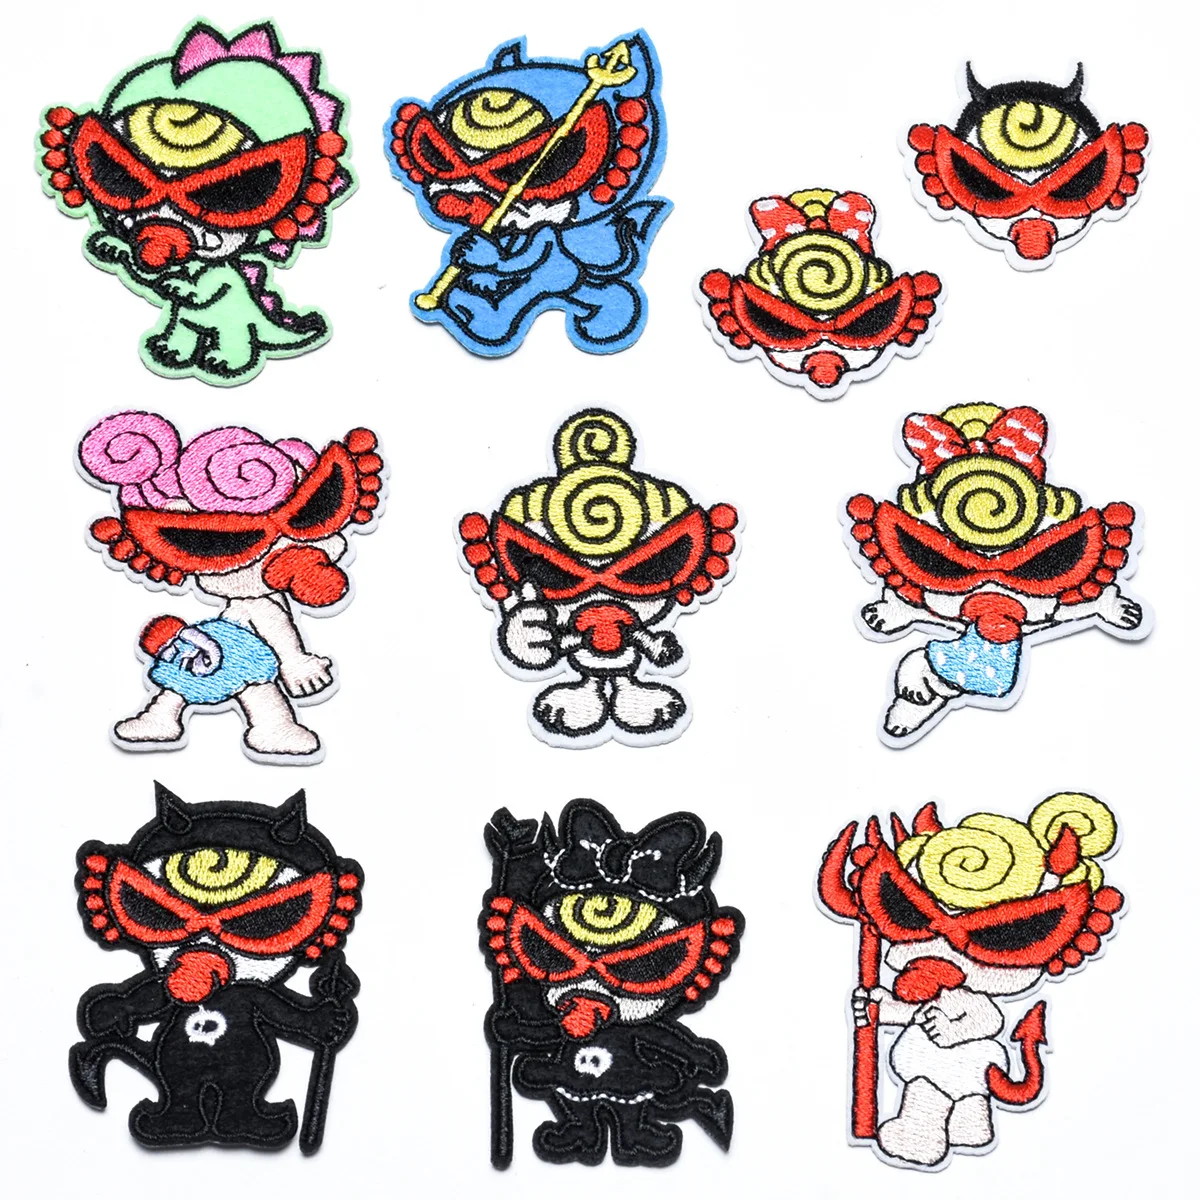 

10pcs Cute Hysteric Mini Cartoon Series Ironing Embroidered Patches For on Clothes Hat Jeans Sticker Sew Patch Applique Badge